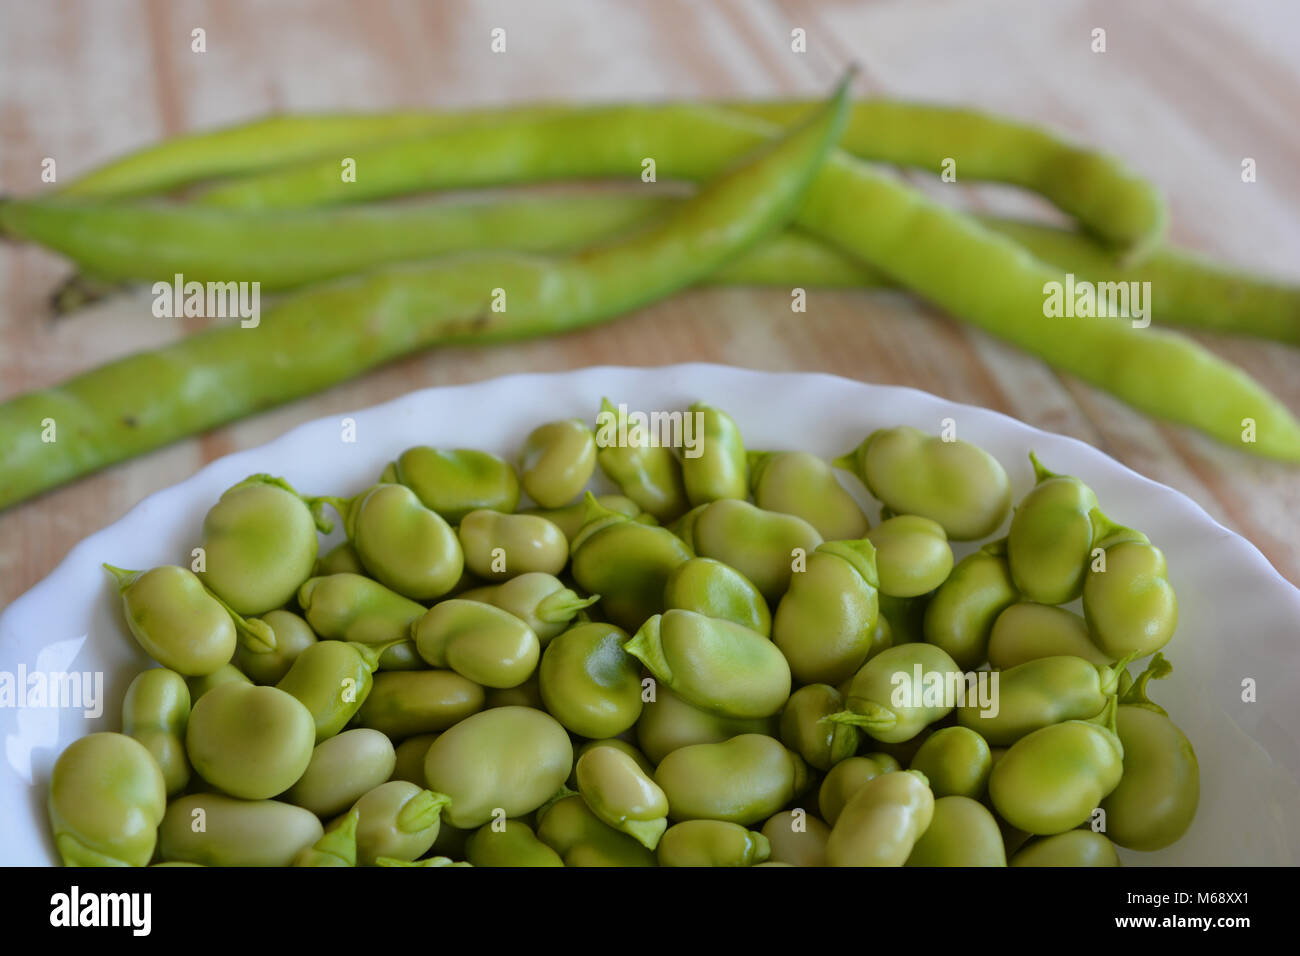 Broad bean, Vicia faba, also known as broad bean, fava bean, faba bean, field bean, bell bean, or tic bean, podded in a bowl with whole beans behind Stock Photo